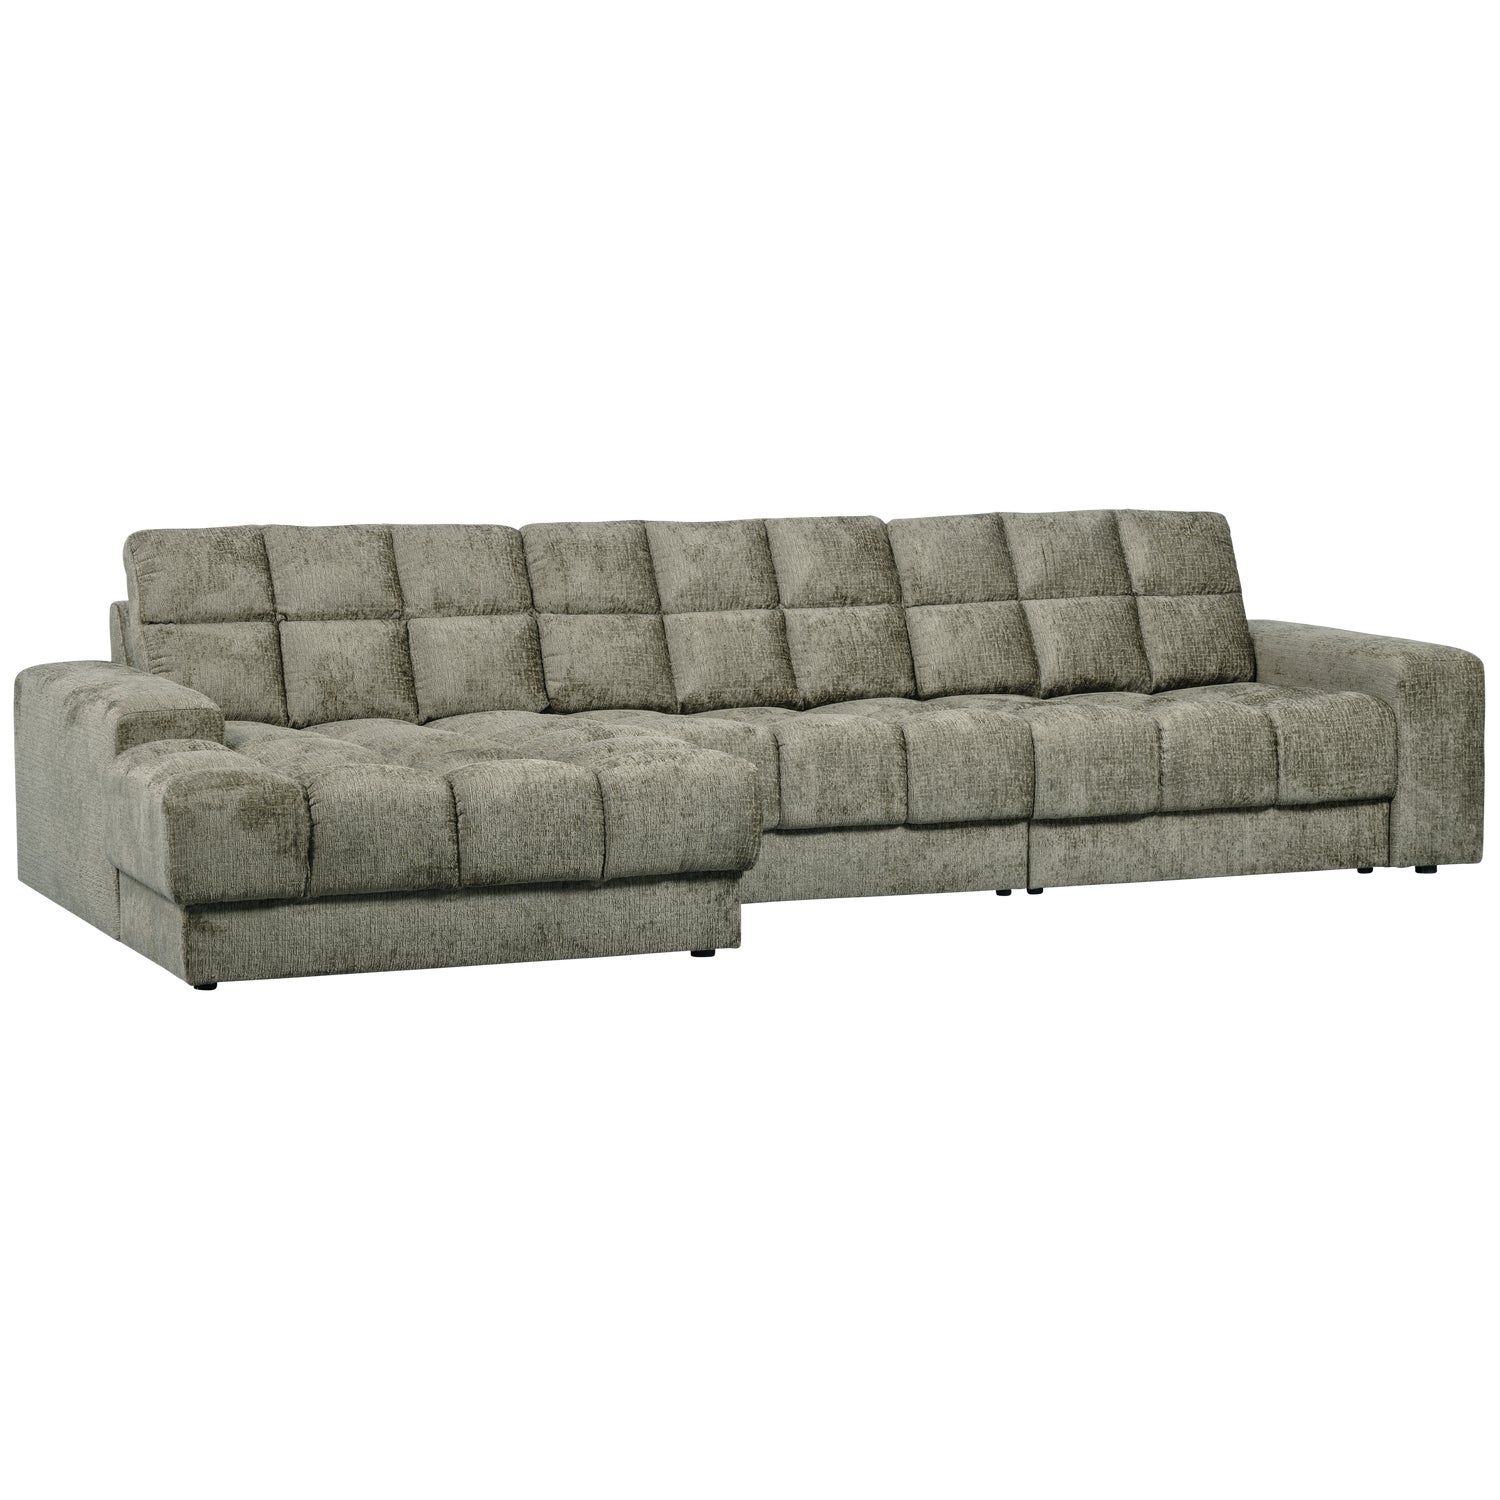 379012-FR-03_VS_WE_Second_date_chaise_longue_links_structure_velvet_frost.png?auto=webp&format=png&width=1500&height=1500